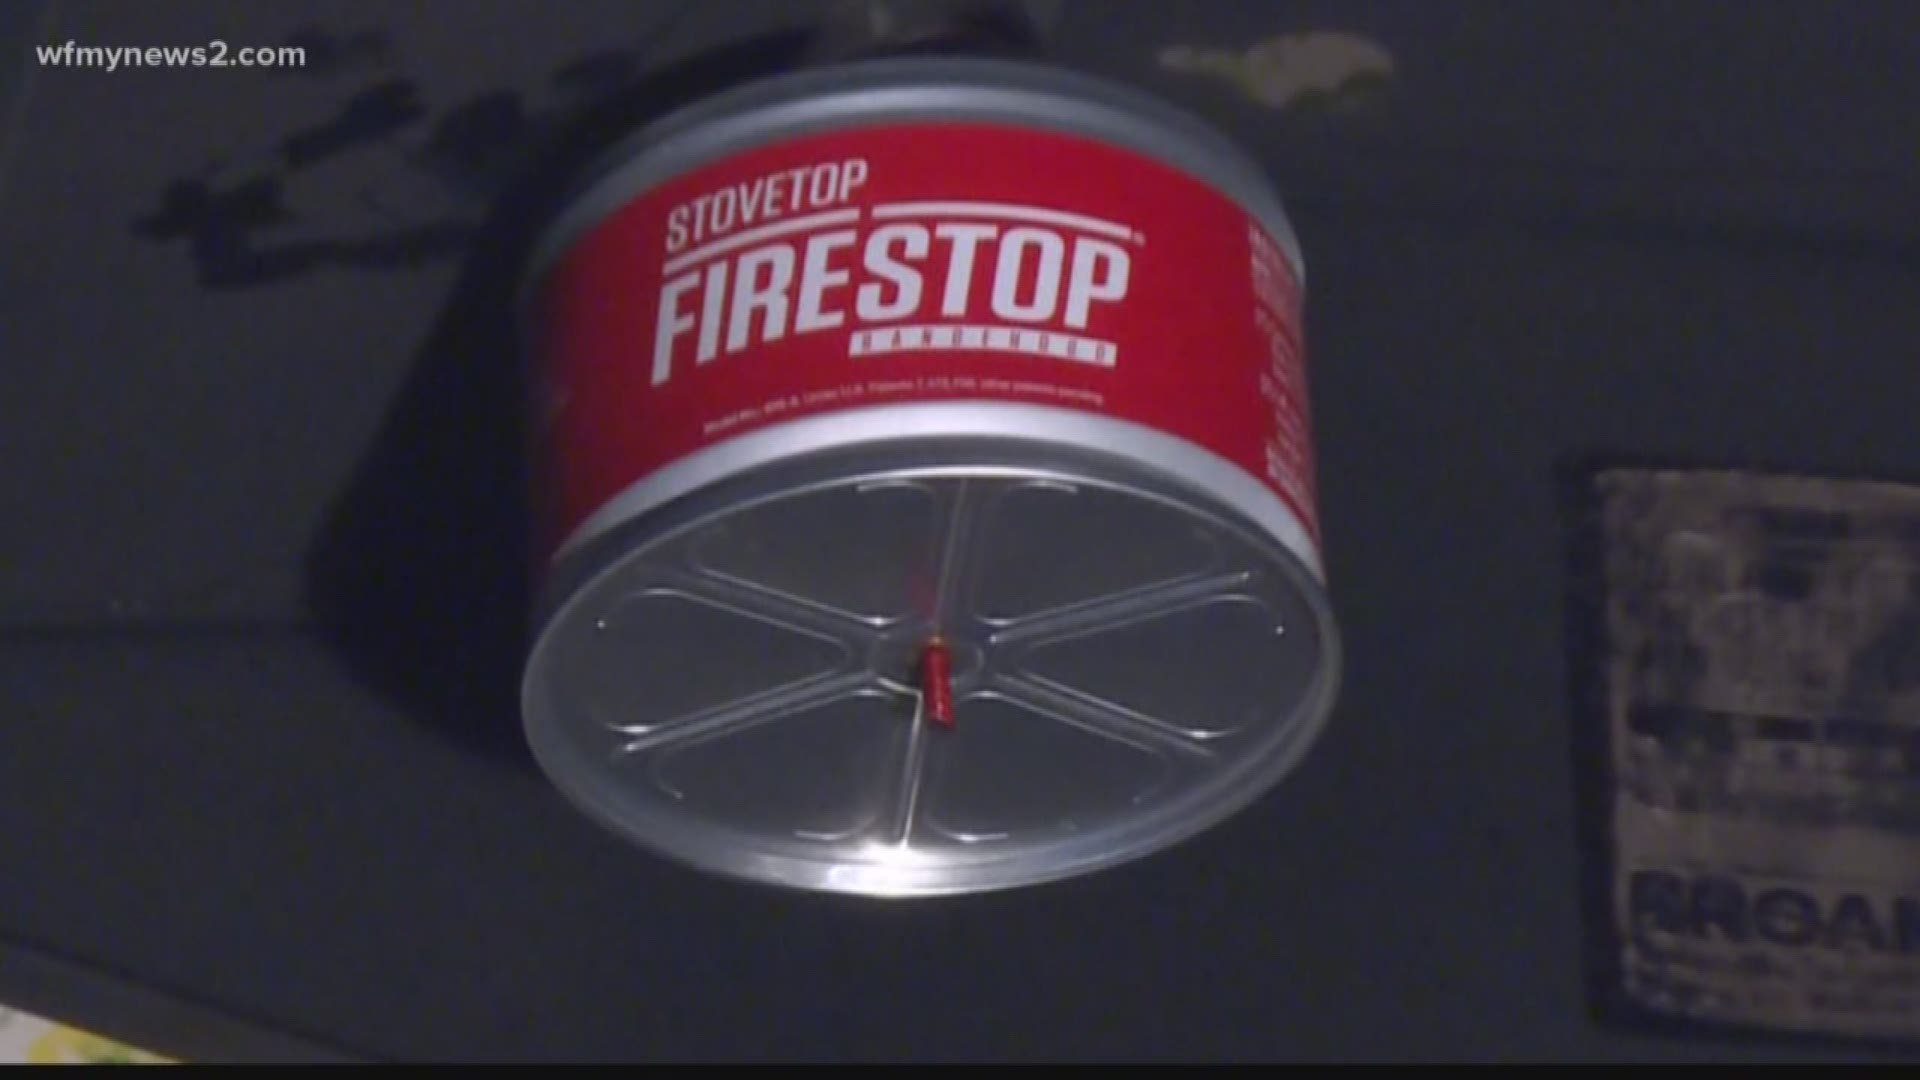 The Firestop doesn't cost much, but could save your whole home when you're not around.